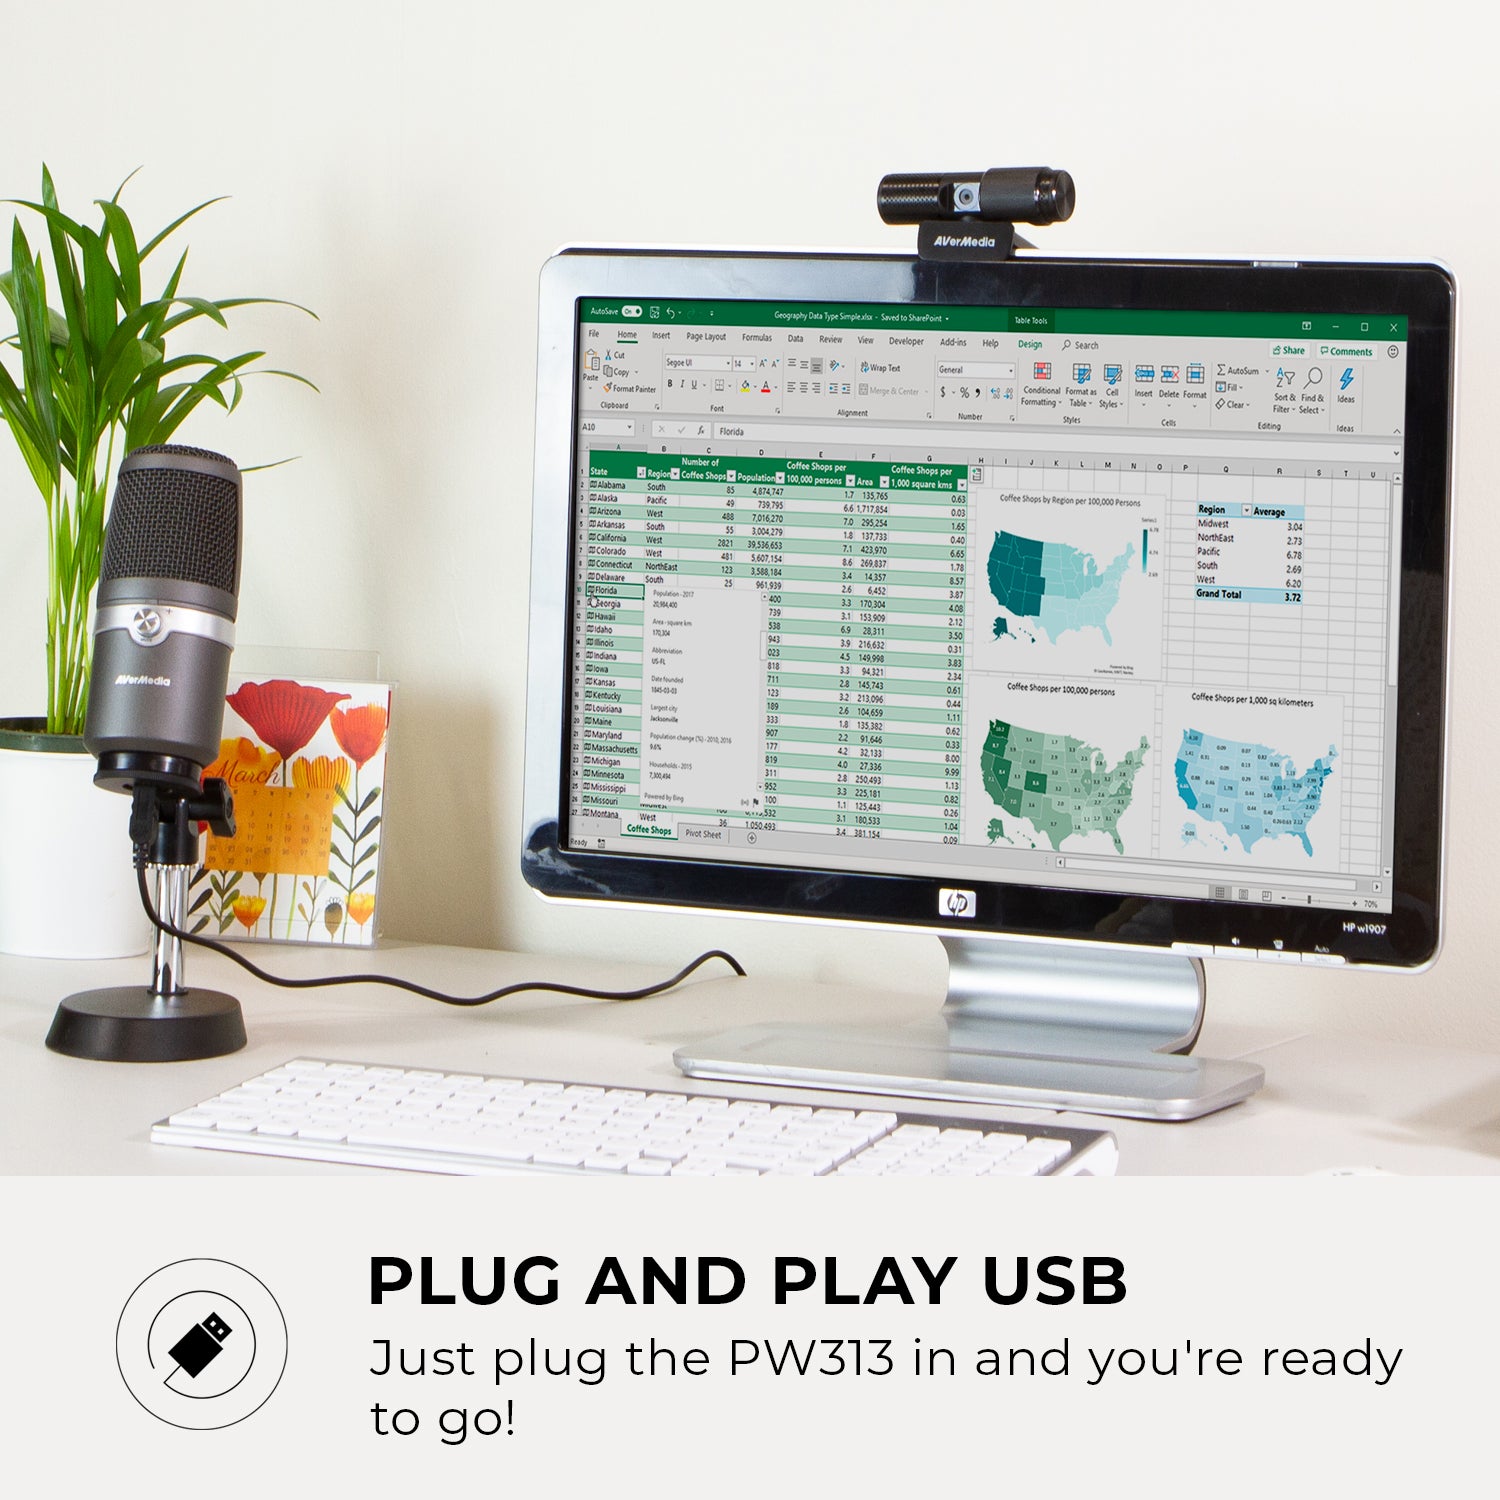 Plug and play USB: Just plug the PW313 in and you're ready to go!